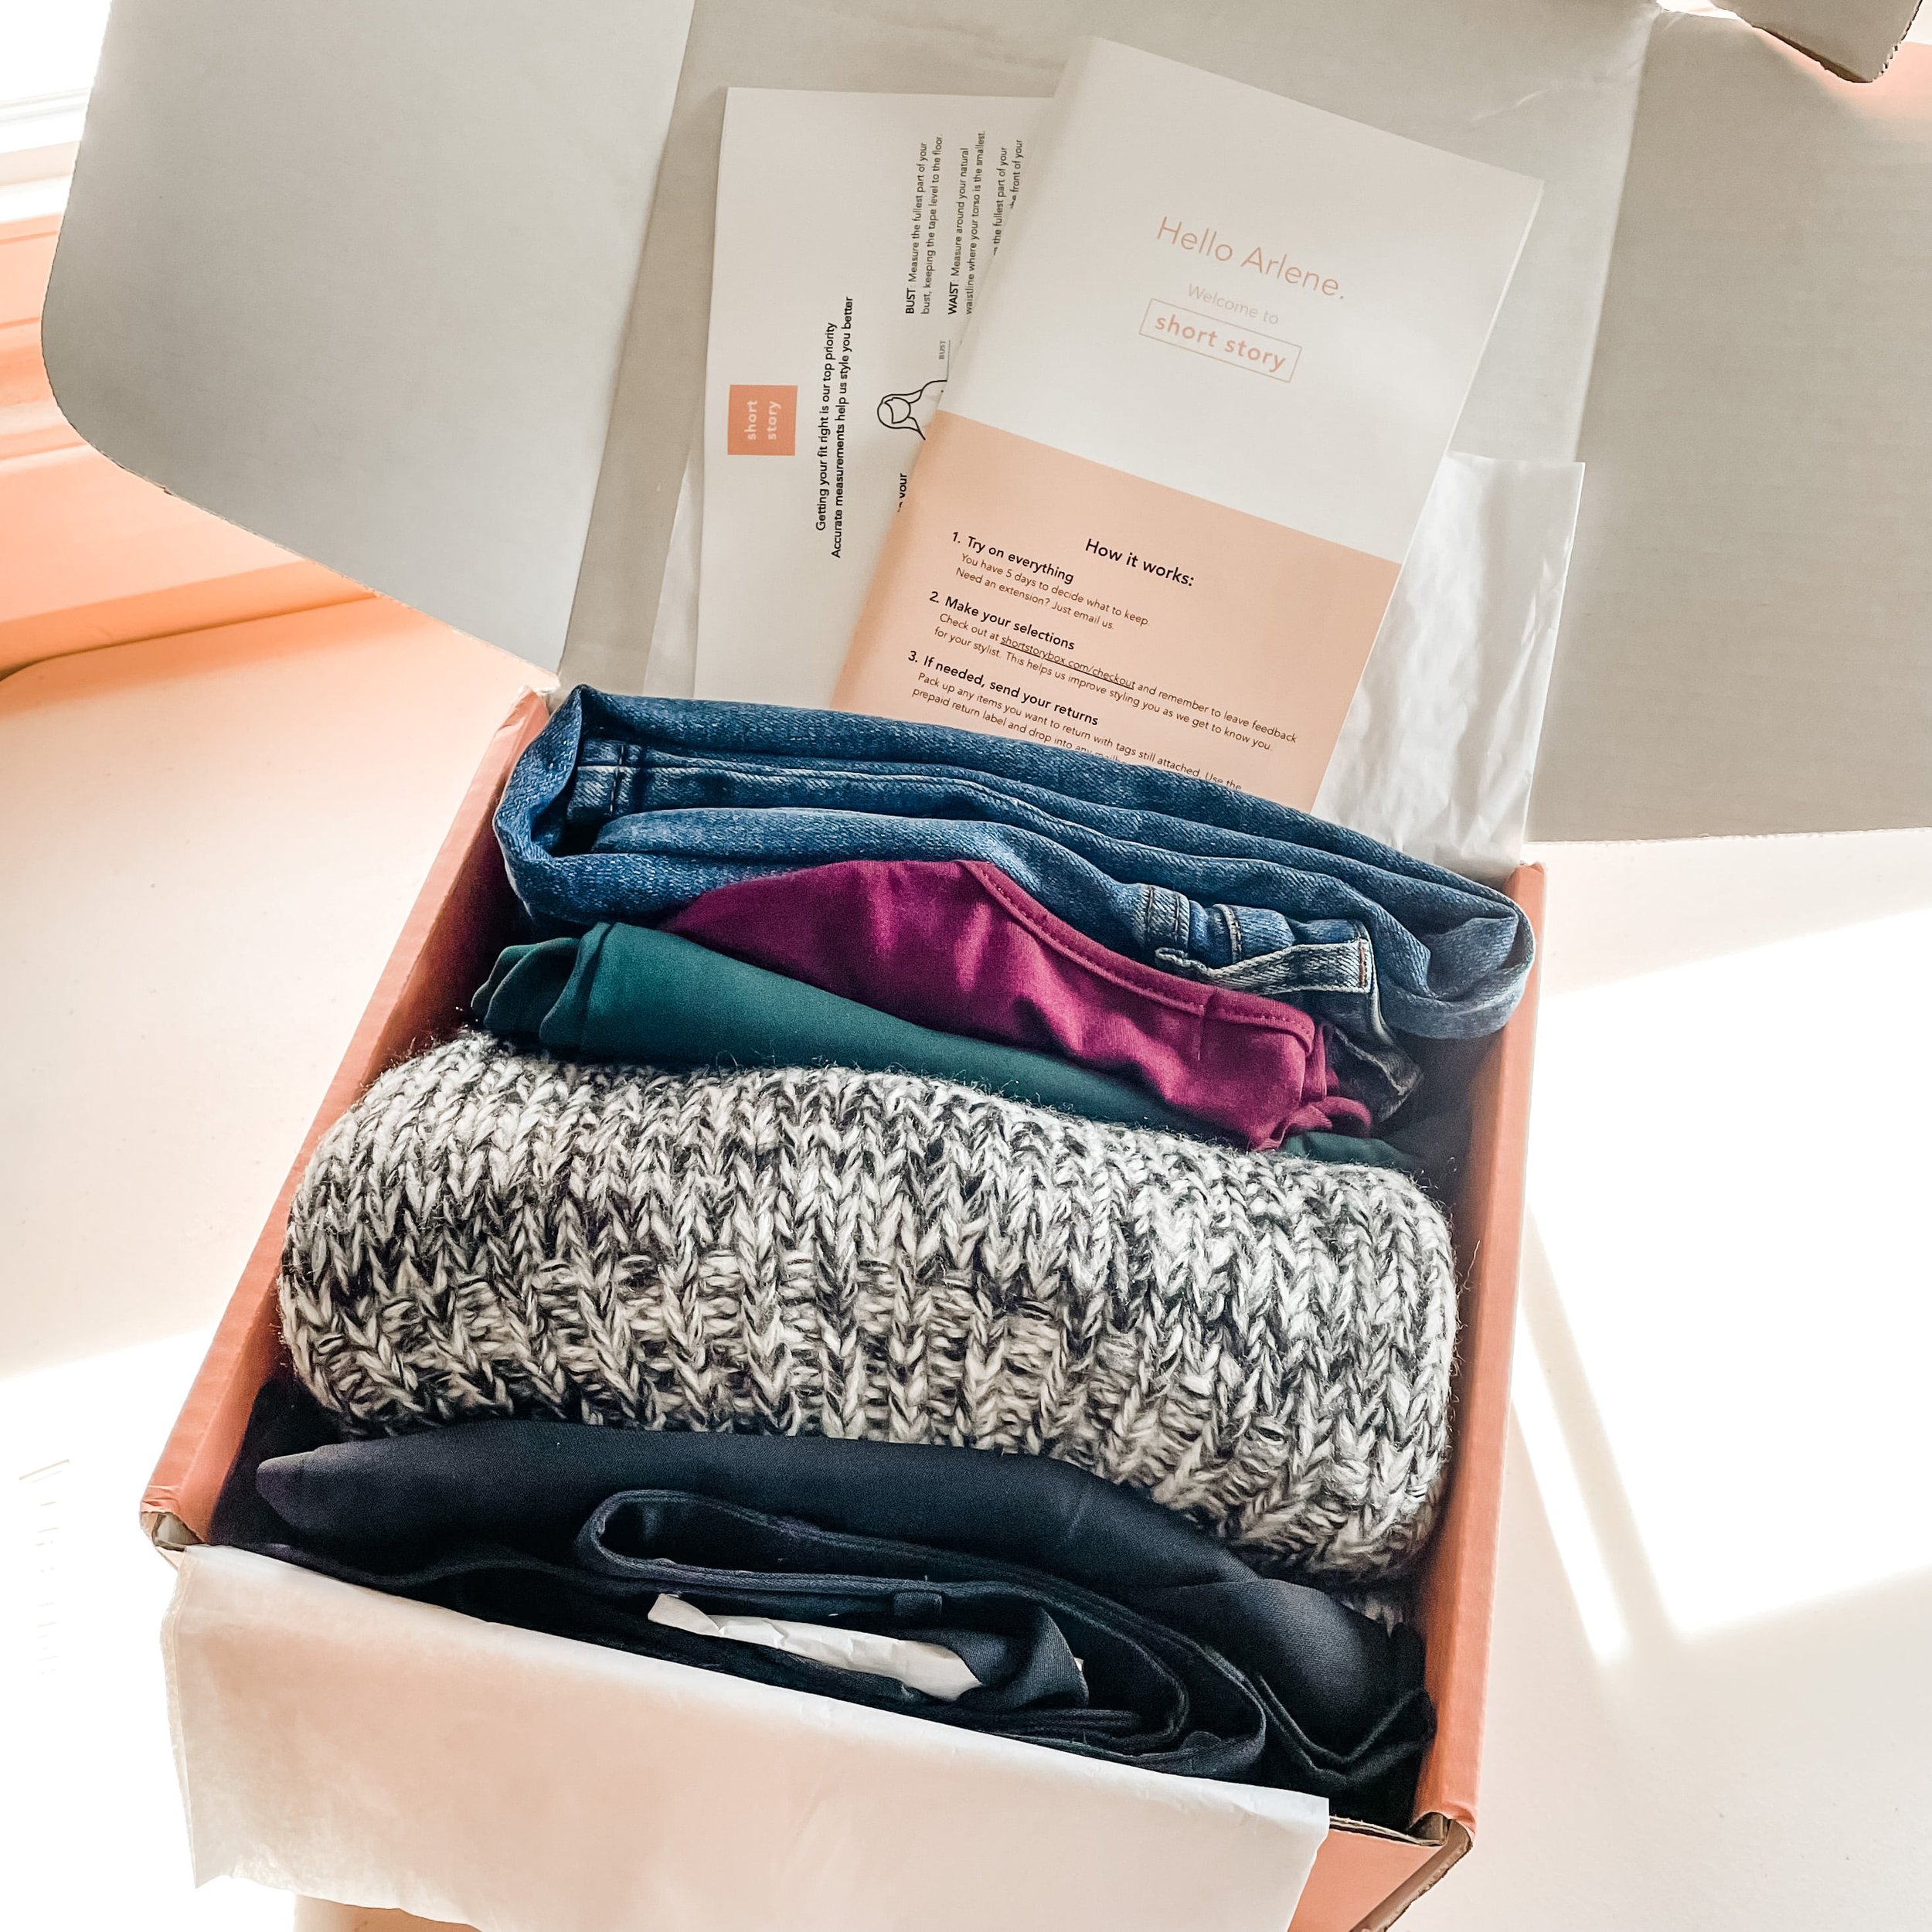 Short Story Box Review: Subscription Clothing Service for Petite